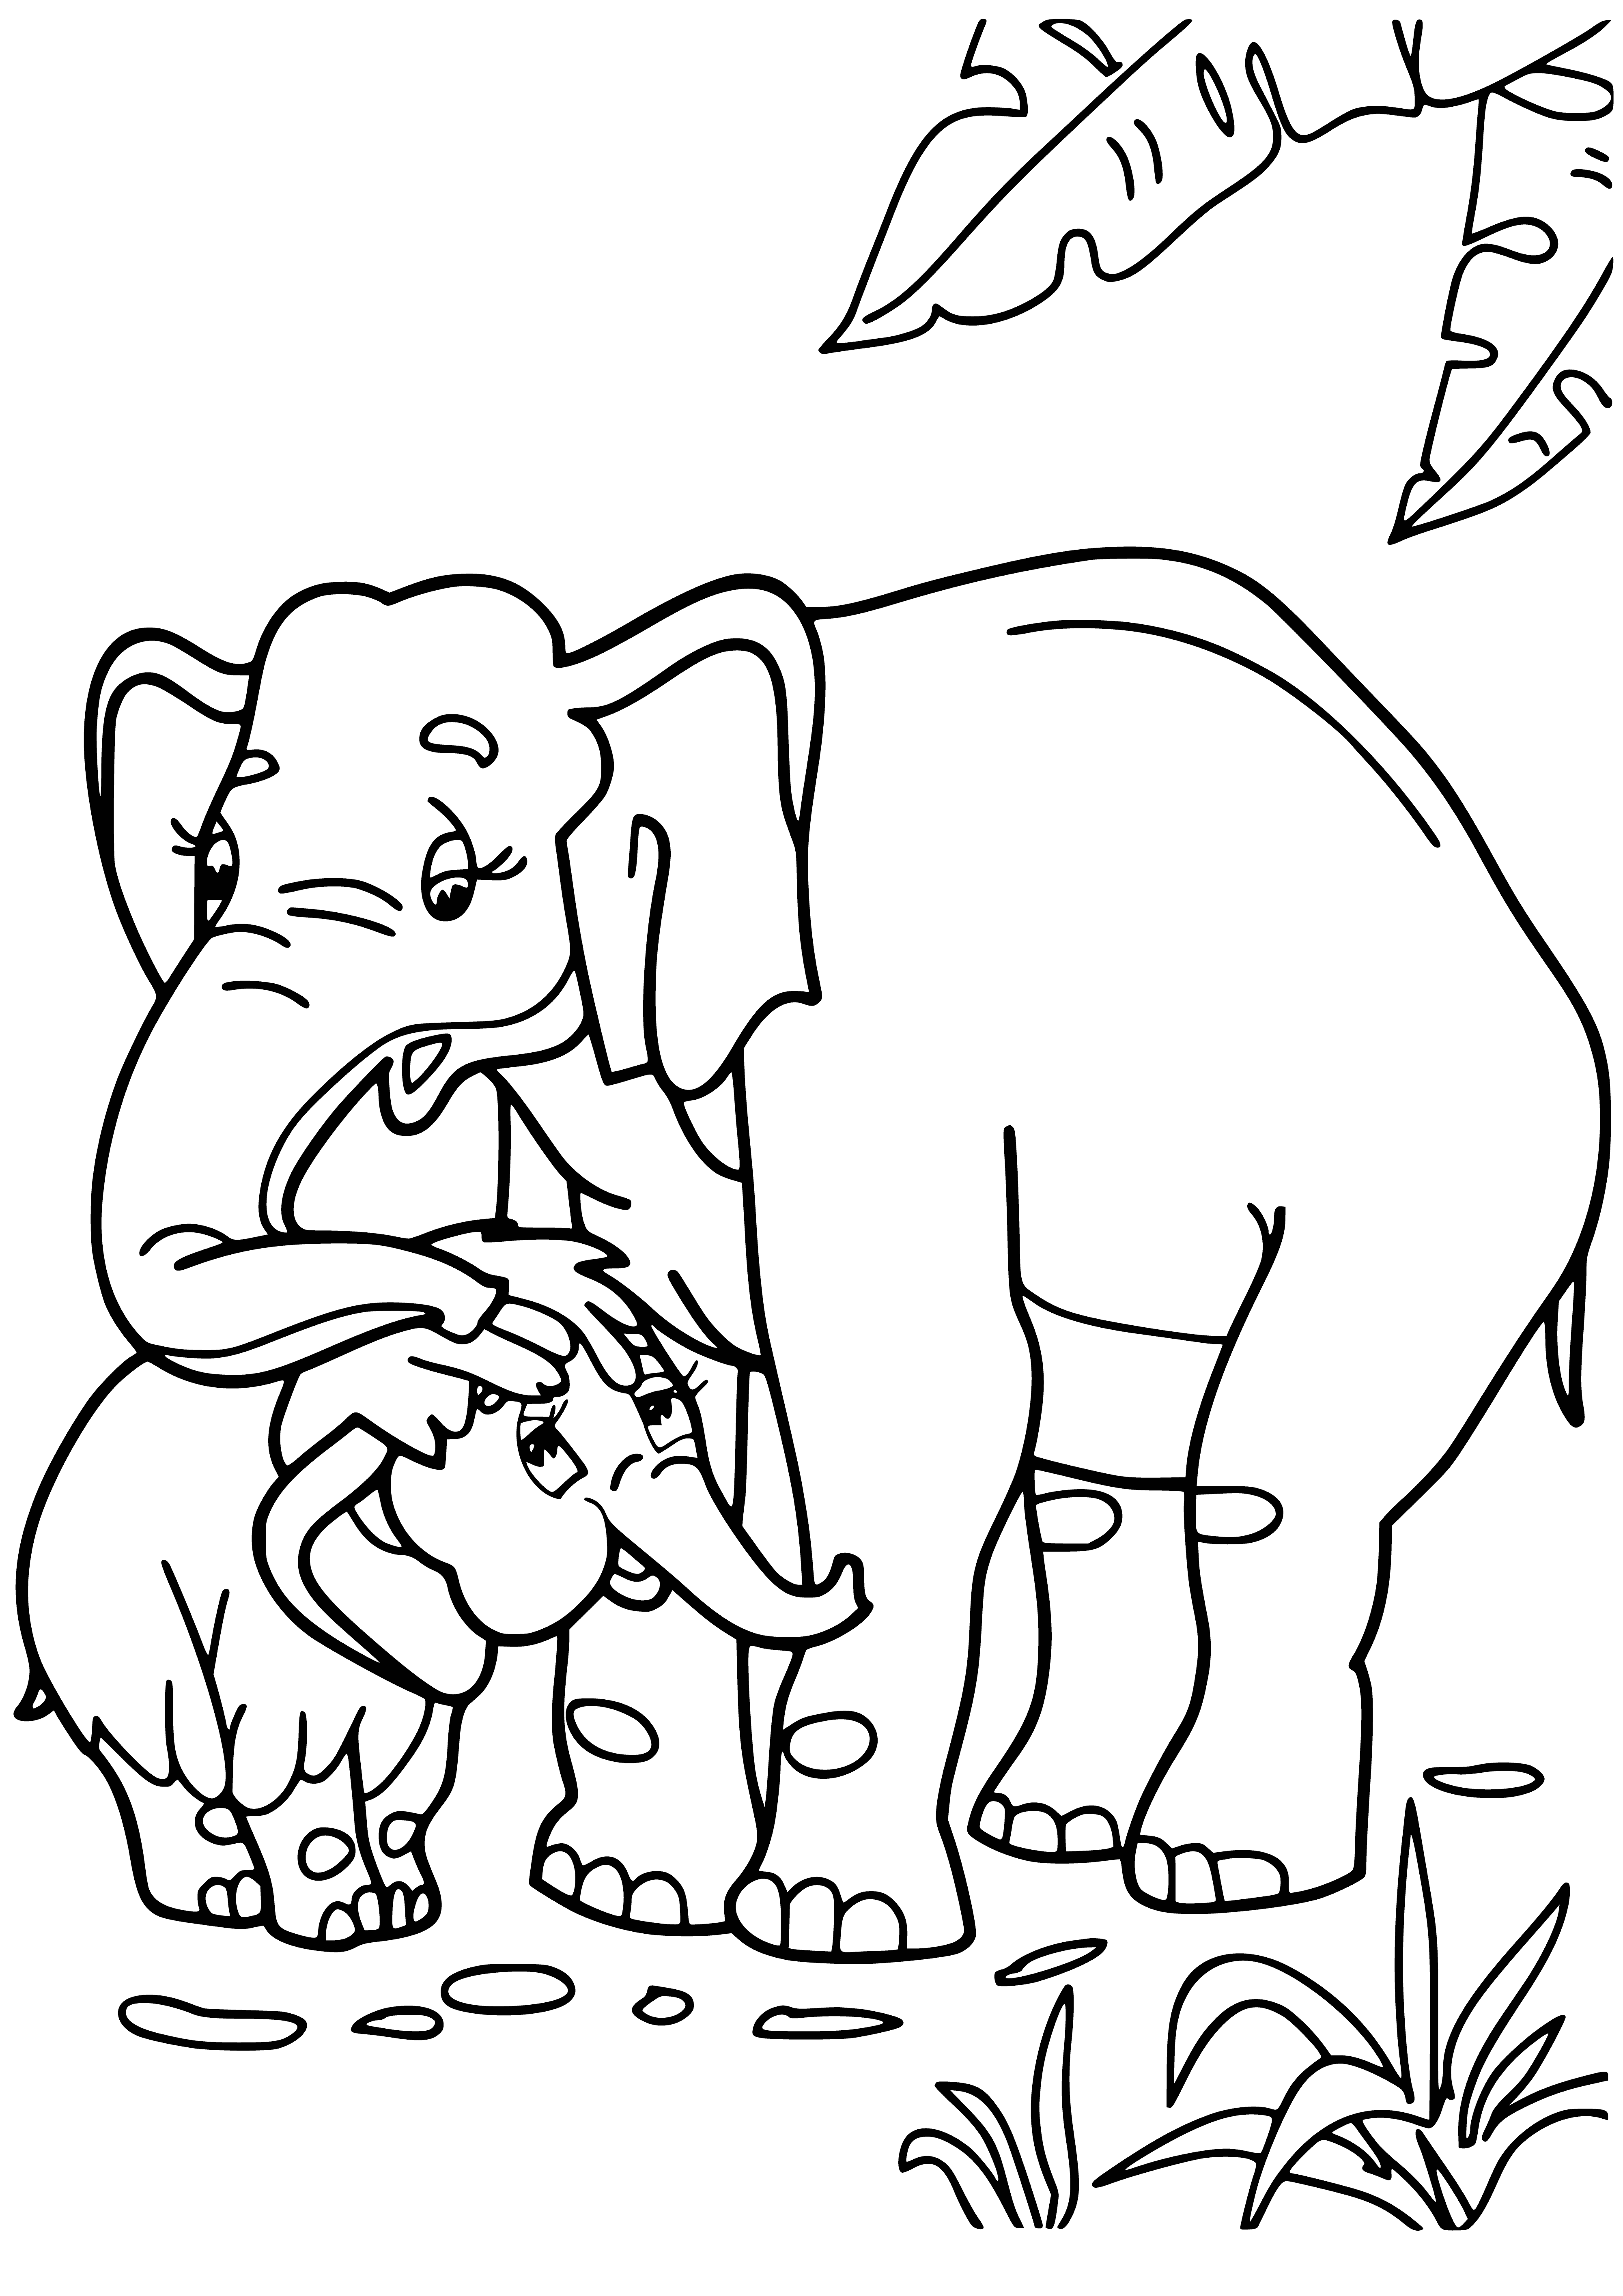 coloring page: A mammoth lying on its side with long, curved tusks & thick, shaggy fur. It has closed eyes & large teeth are visible in its open mouth. #coloringpage